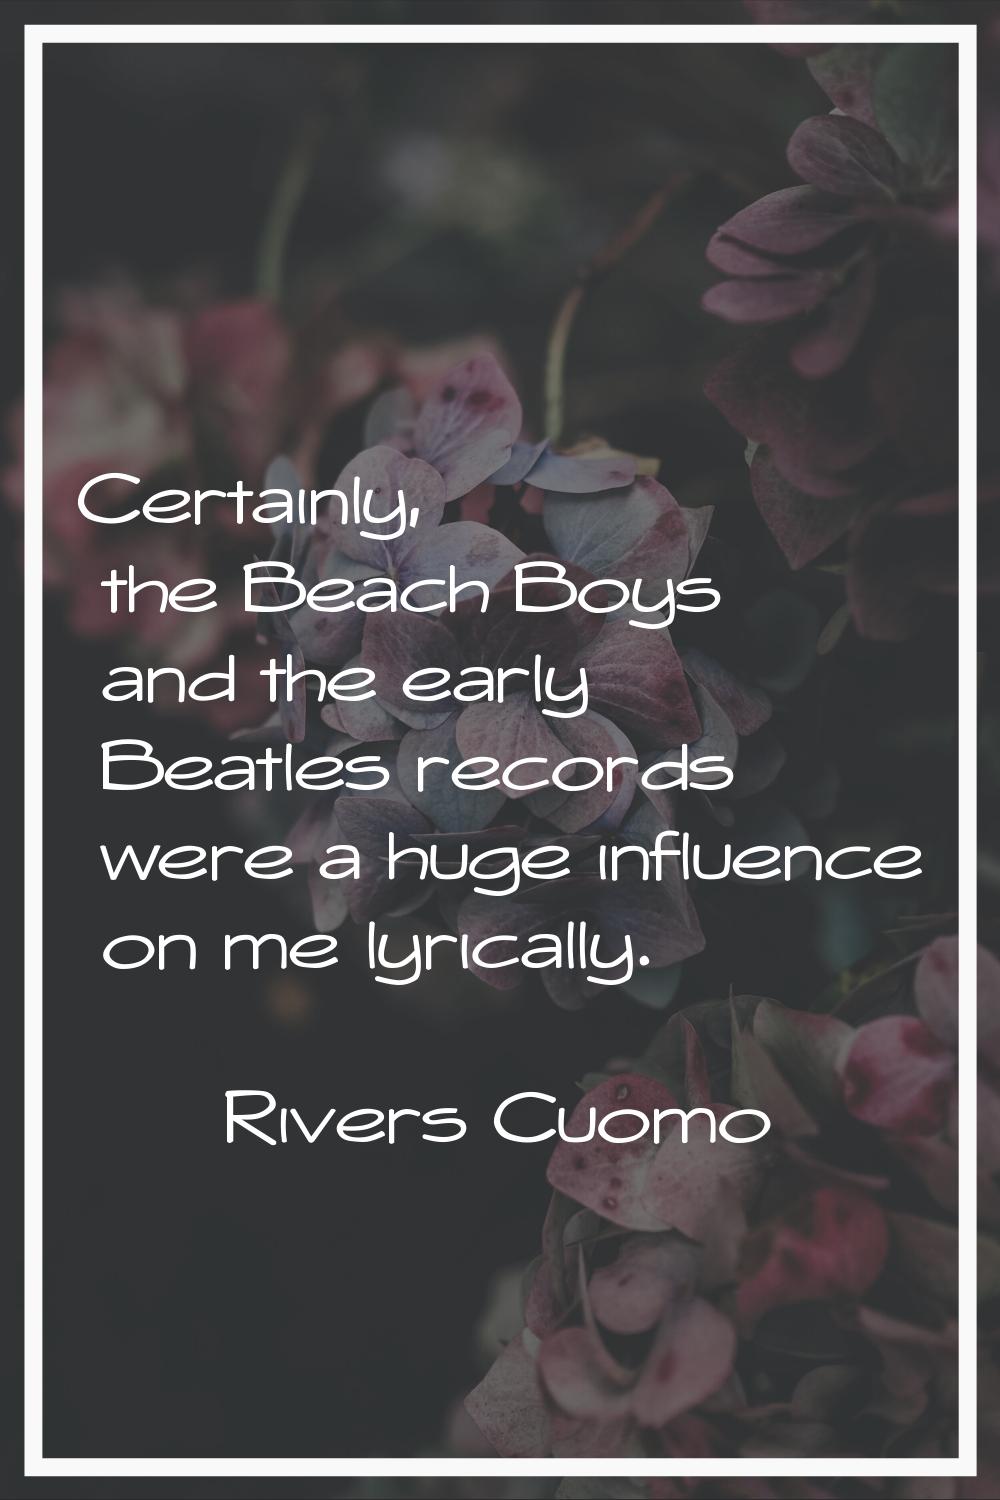 Certainly, the Beach Boys and the early Beatles records were a huge influence on me lyrically.